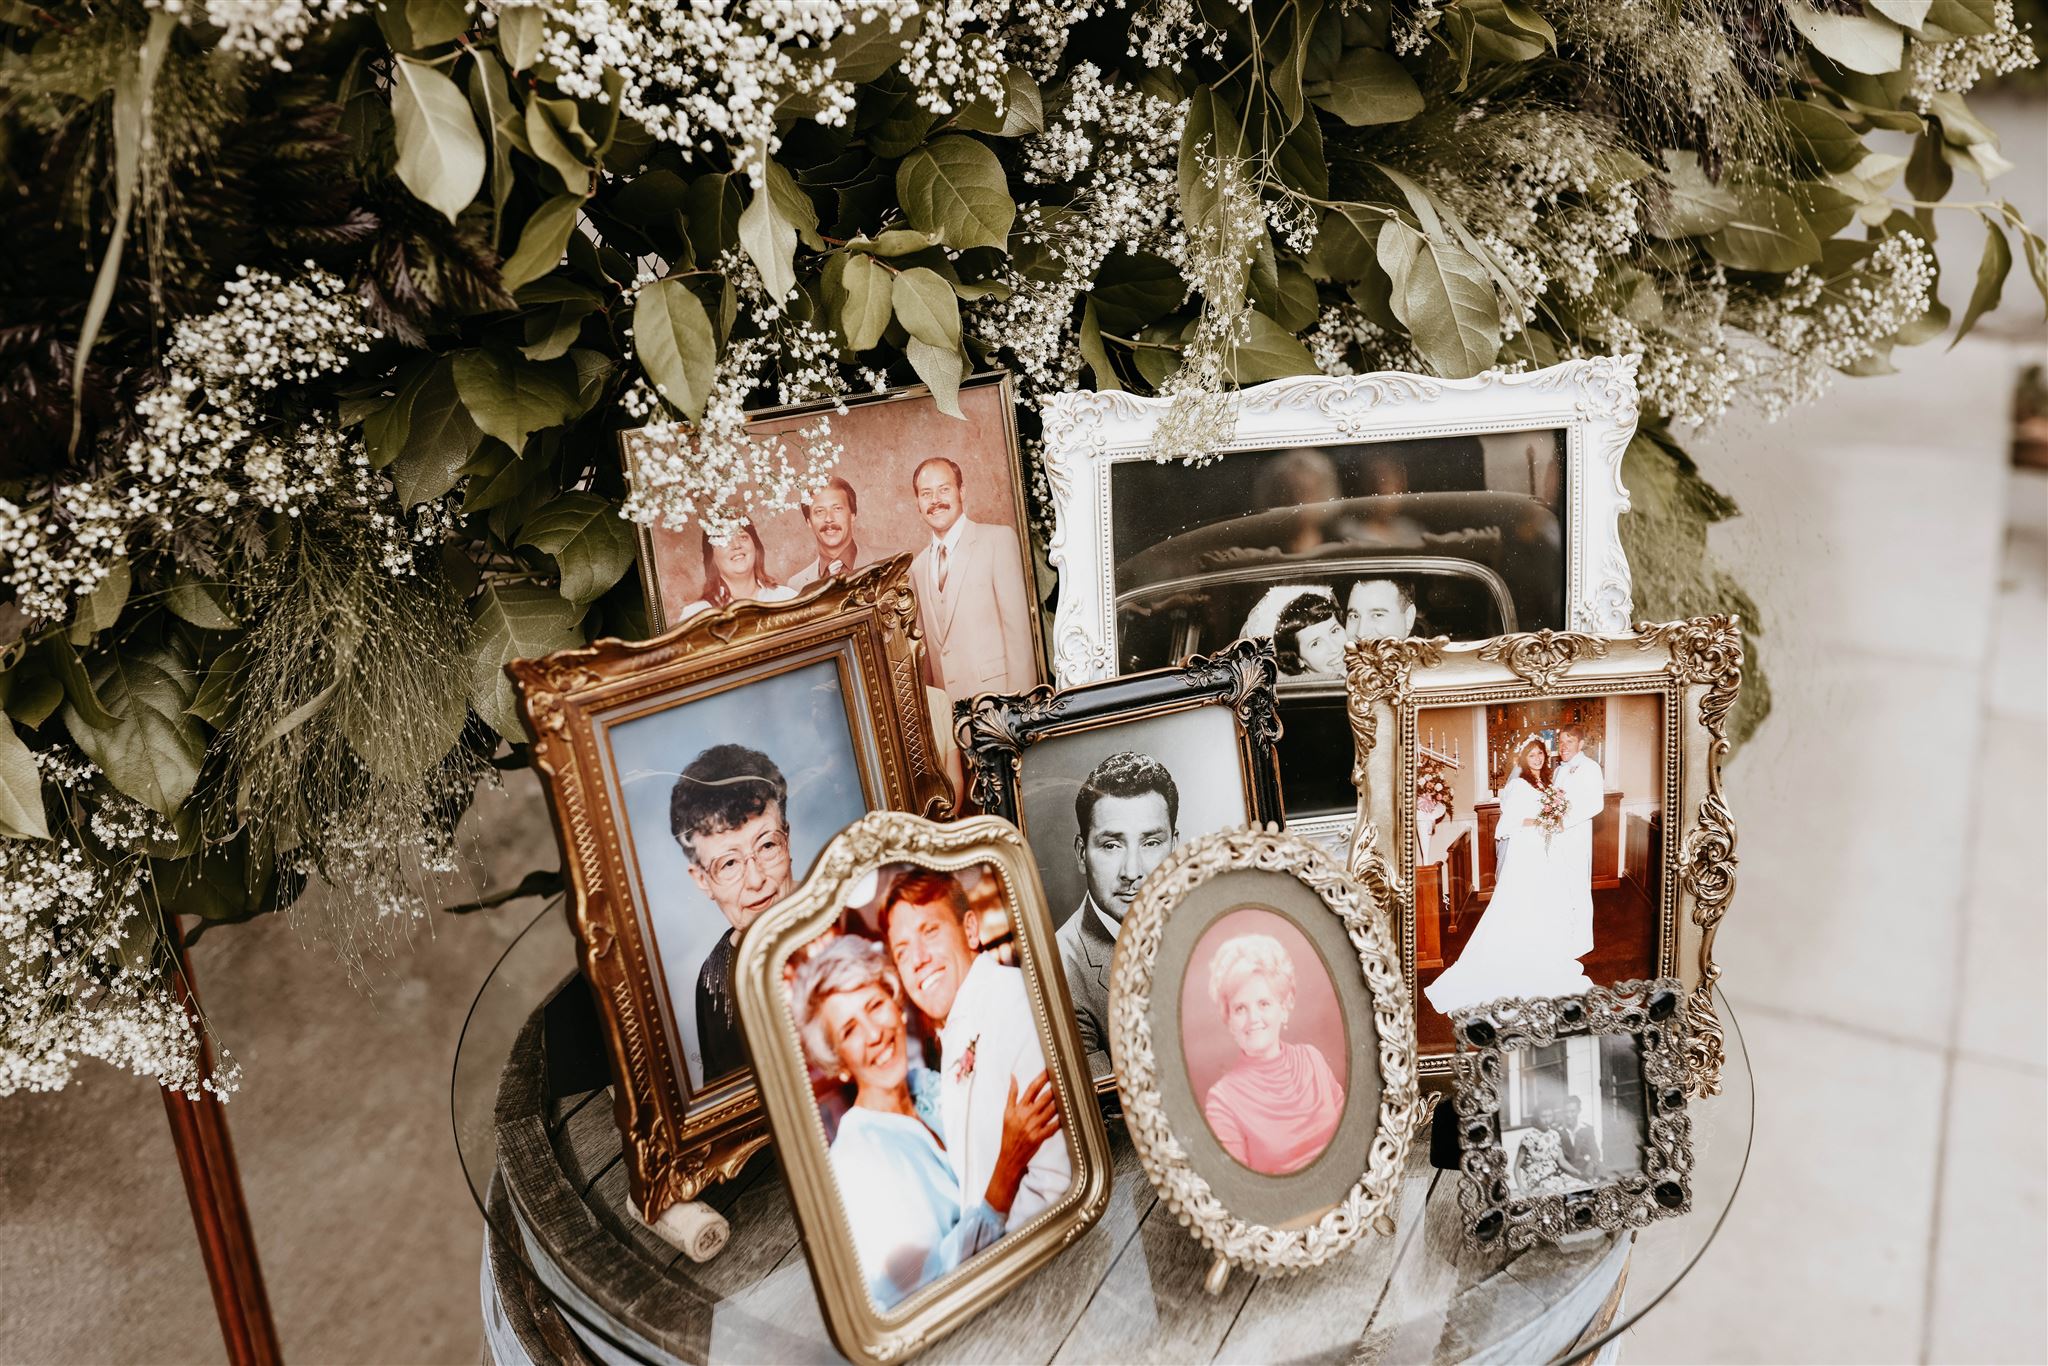 wedding decorations, photos of loved ones